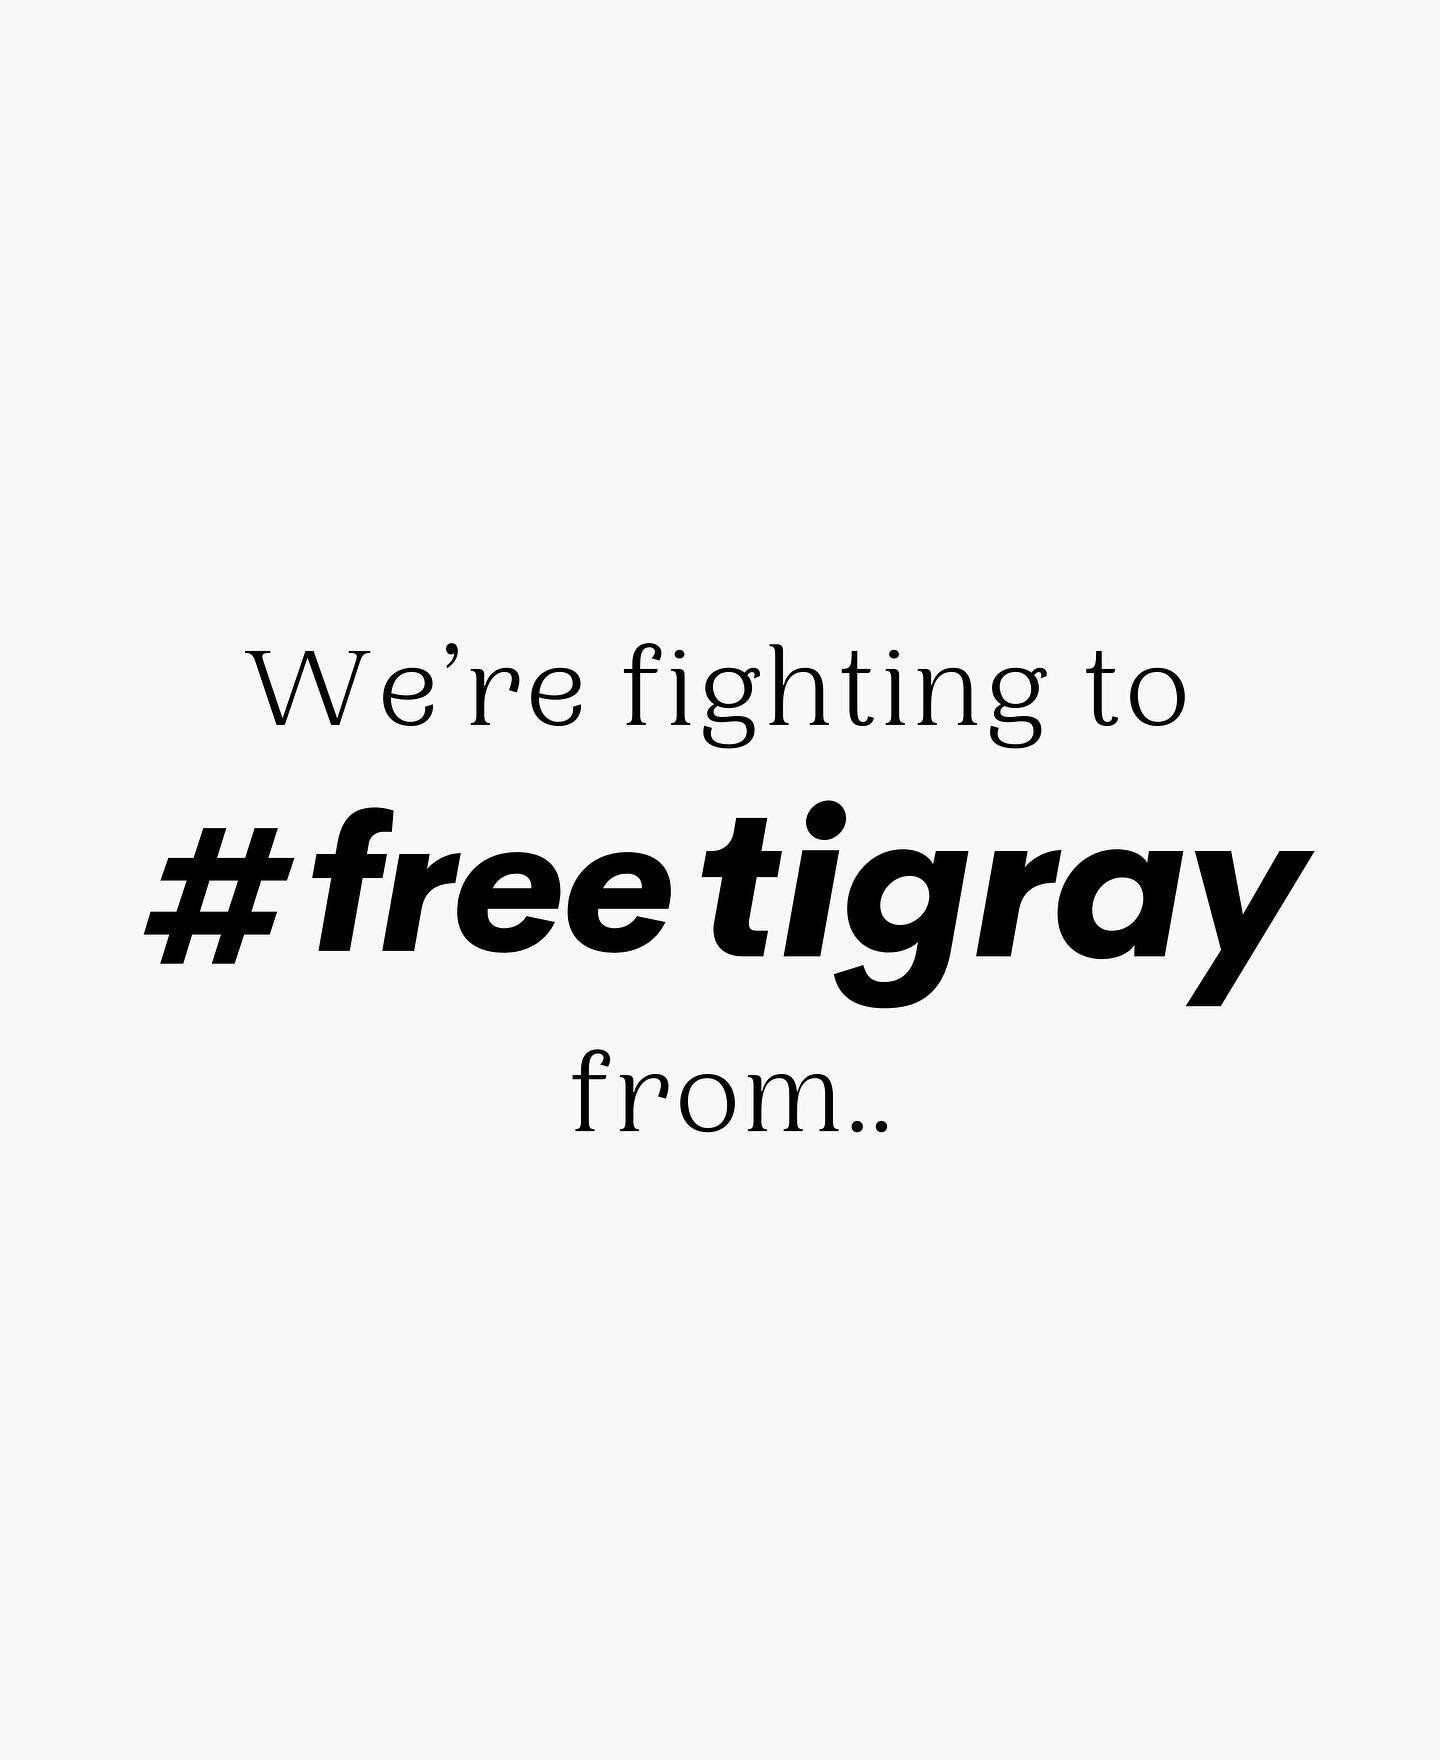 There are many good reasons for a FreeTigray, none for oppression. 

300+ days of a genocide and the people of #Tigray have had enough. They have gone through mass killings, systematic rape, man made famine, ethnic cleansing, the occupation of Wester